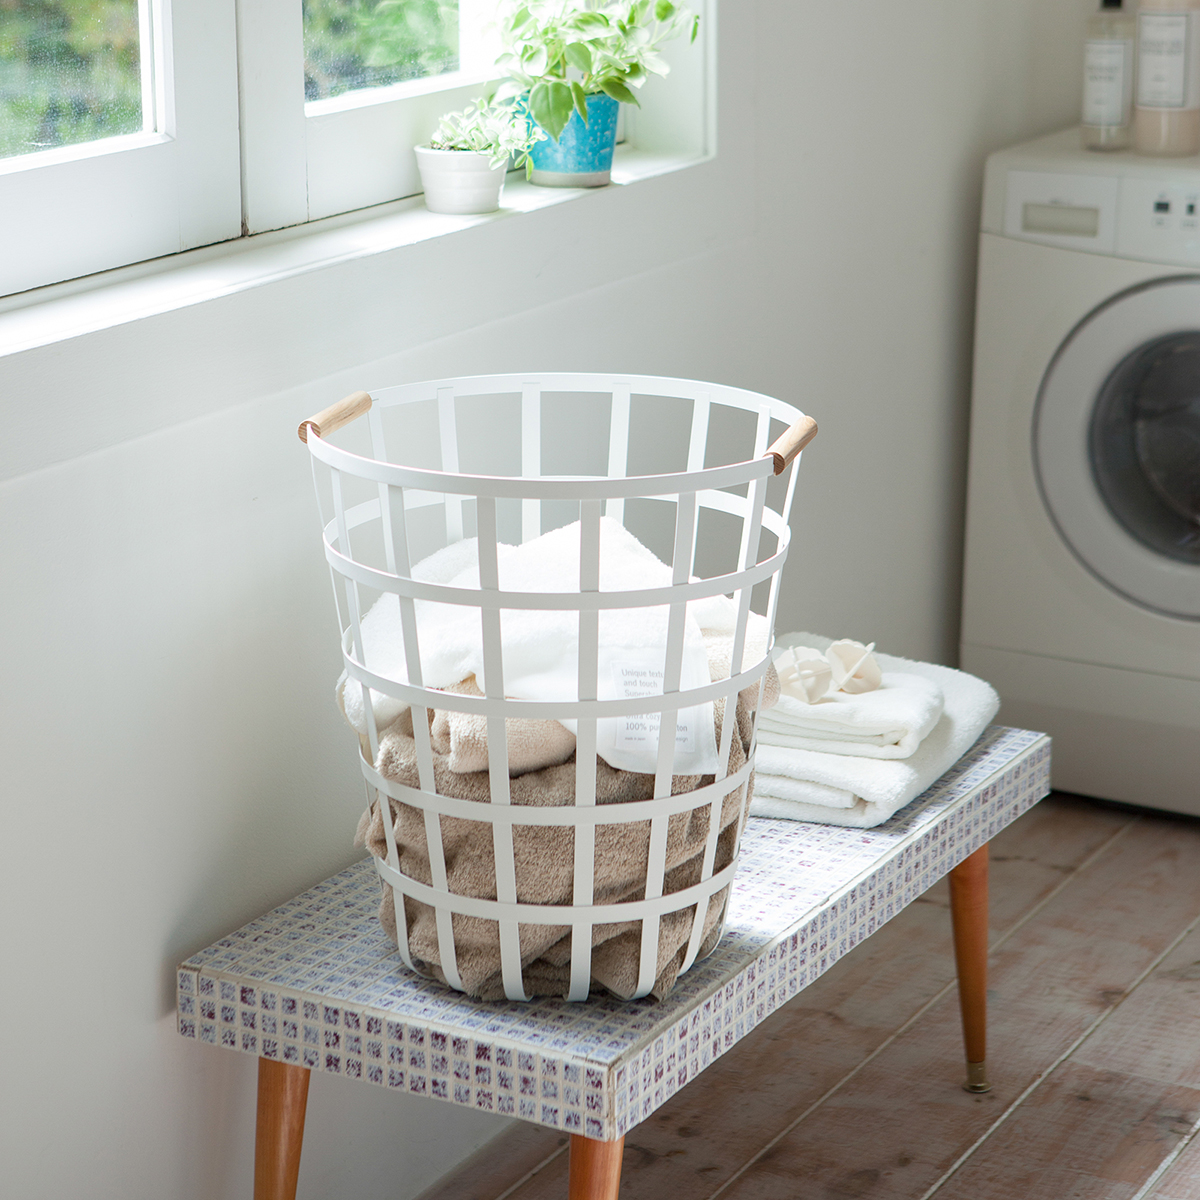 Yamazaki Tosca Wire Laundry Basket | The Container Store